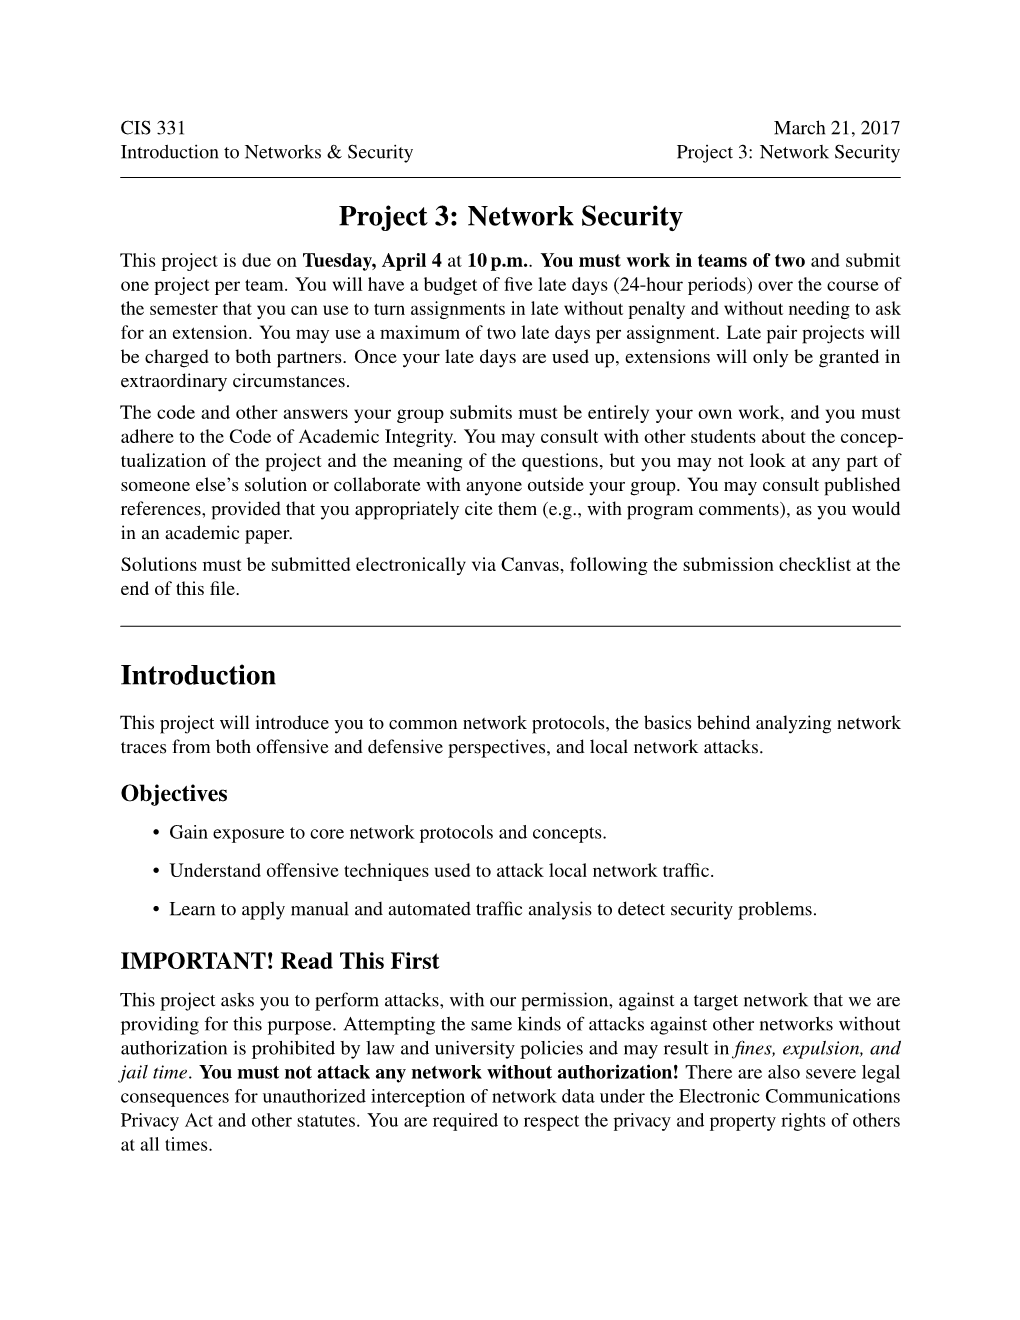 Project 3: Network Security